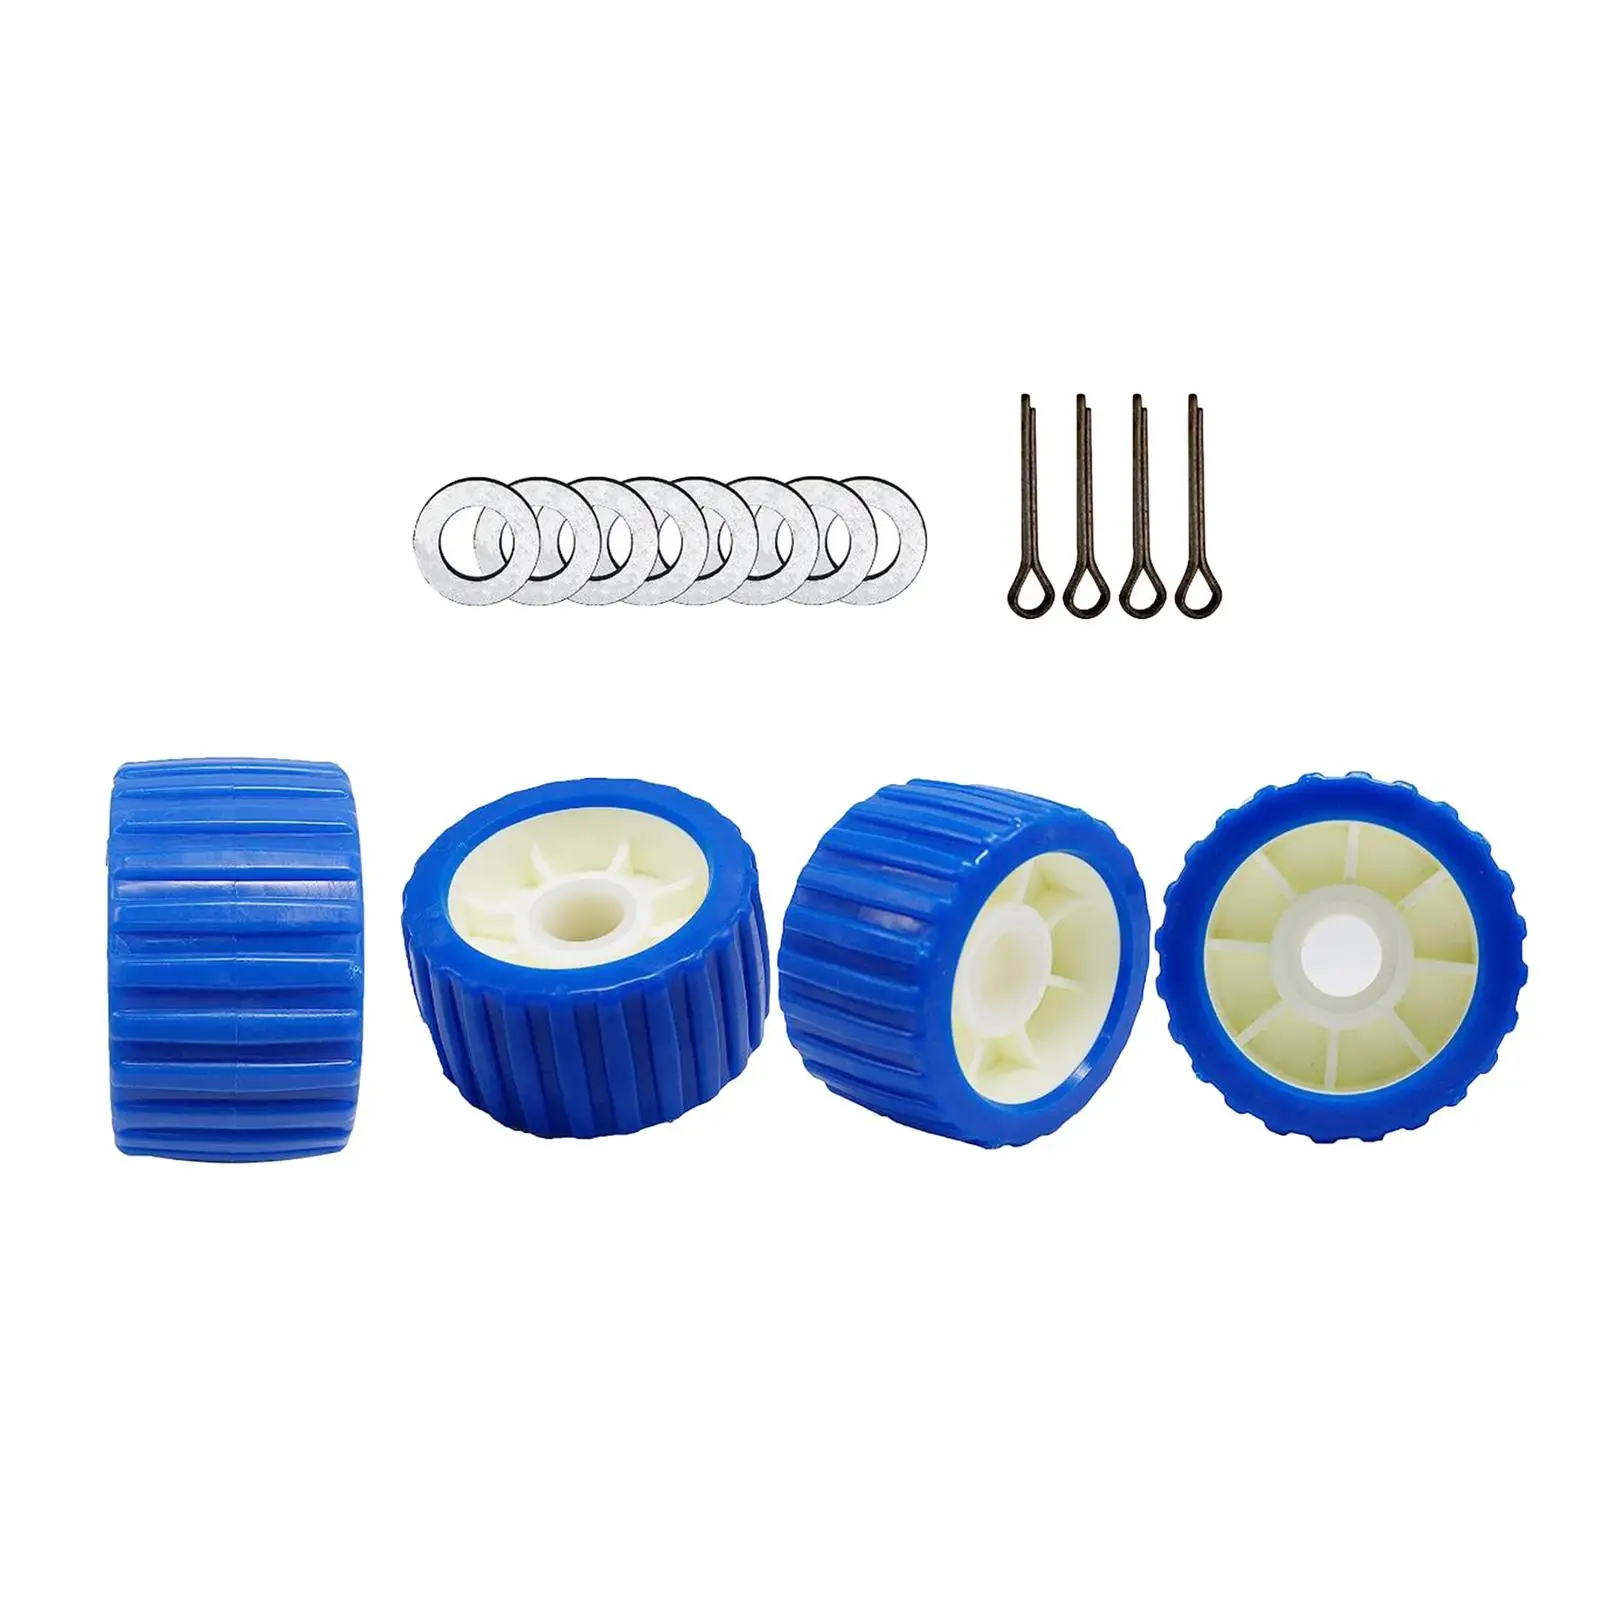 Boat Trailer Roller Accessories for Trailers Motor Yacht Rubber Boat